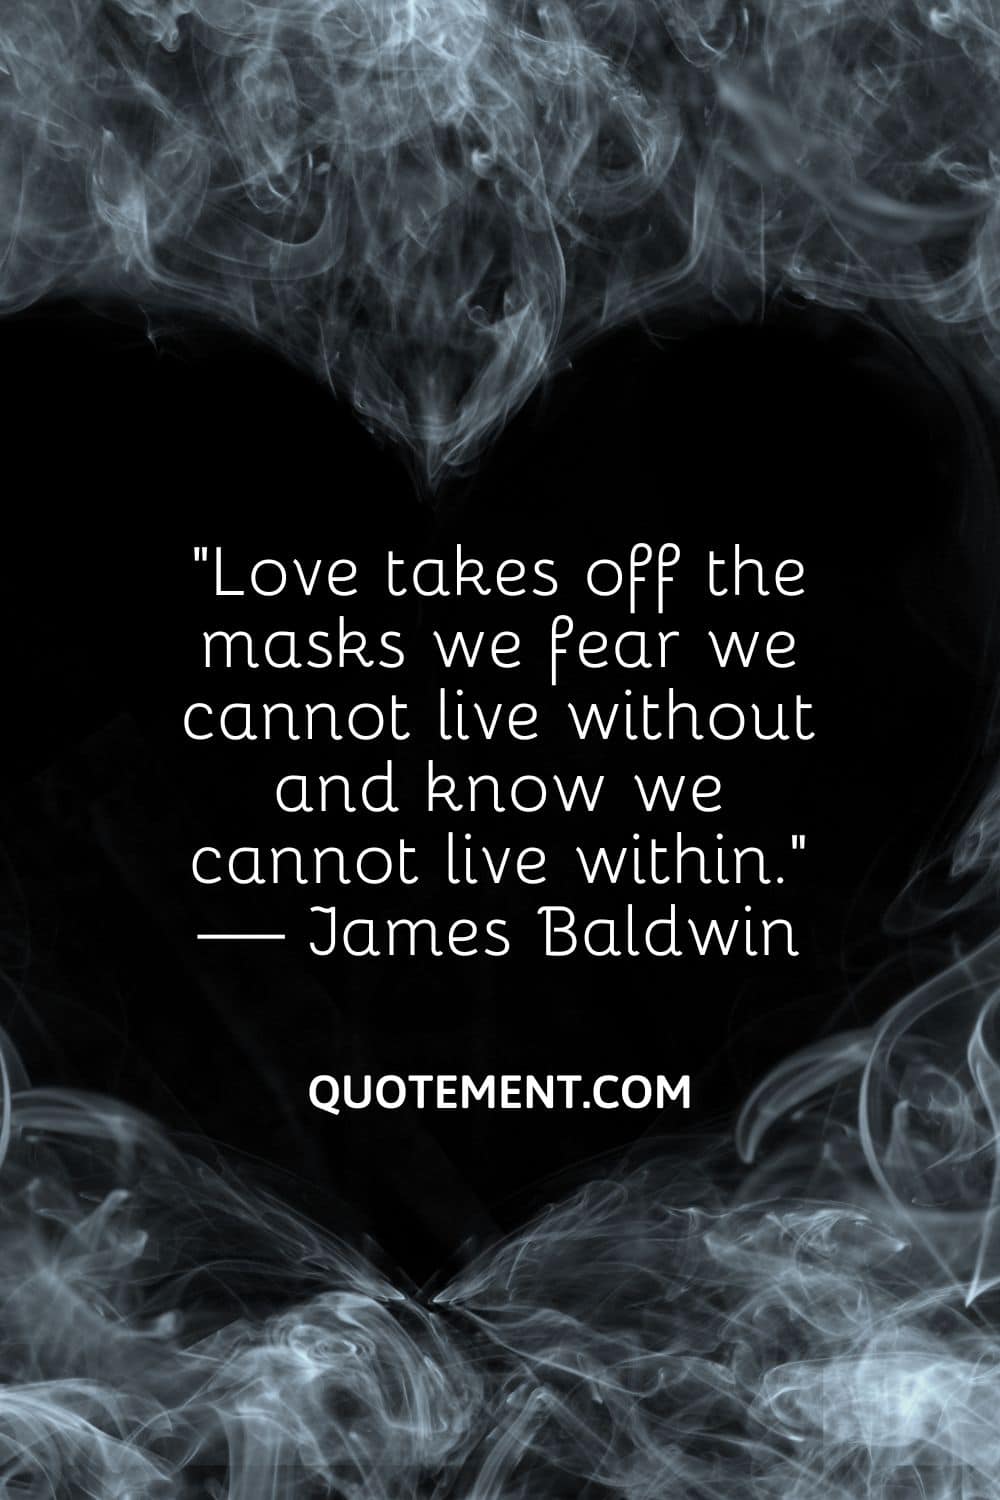 Love takes off the masks we fear we cannot live without and know we cannot live within